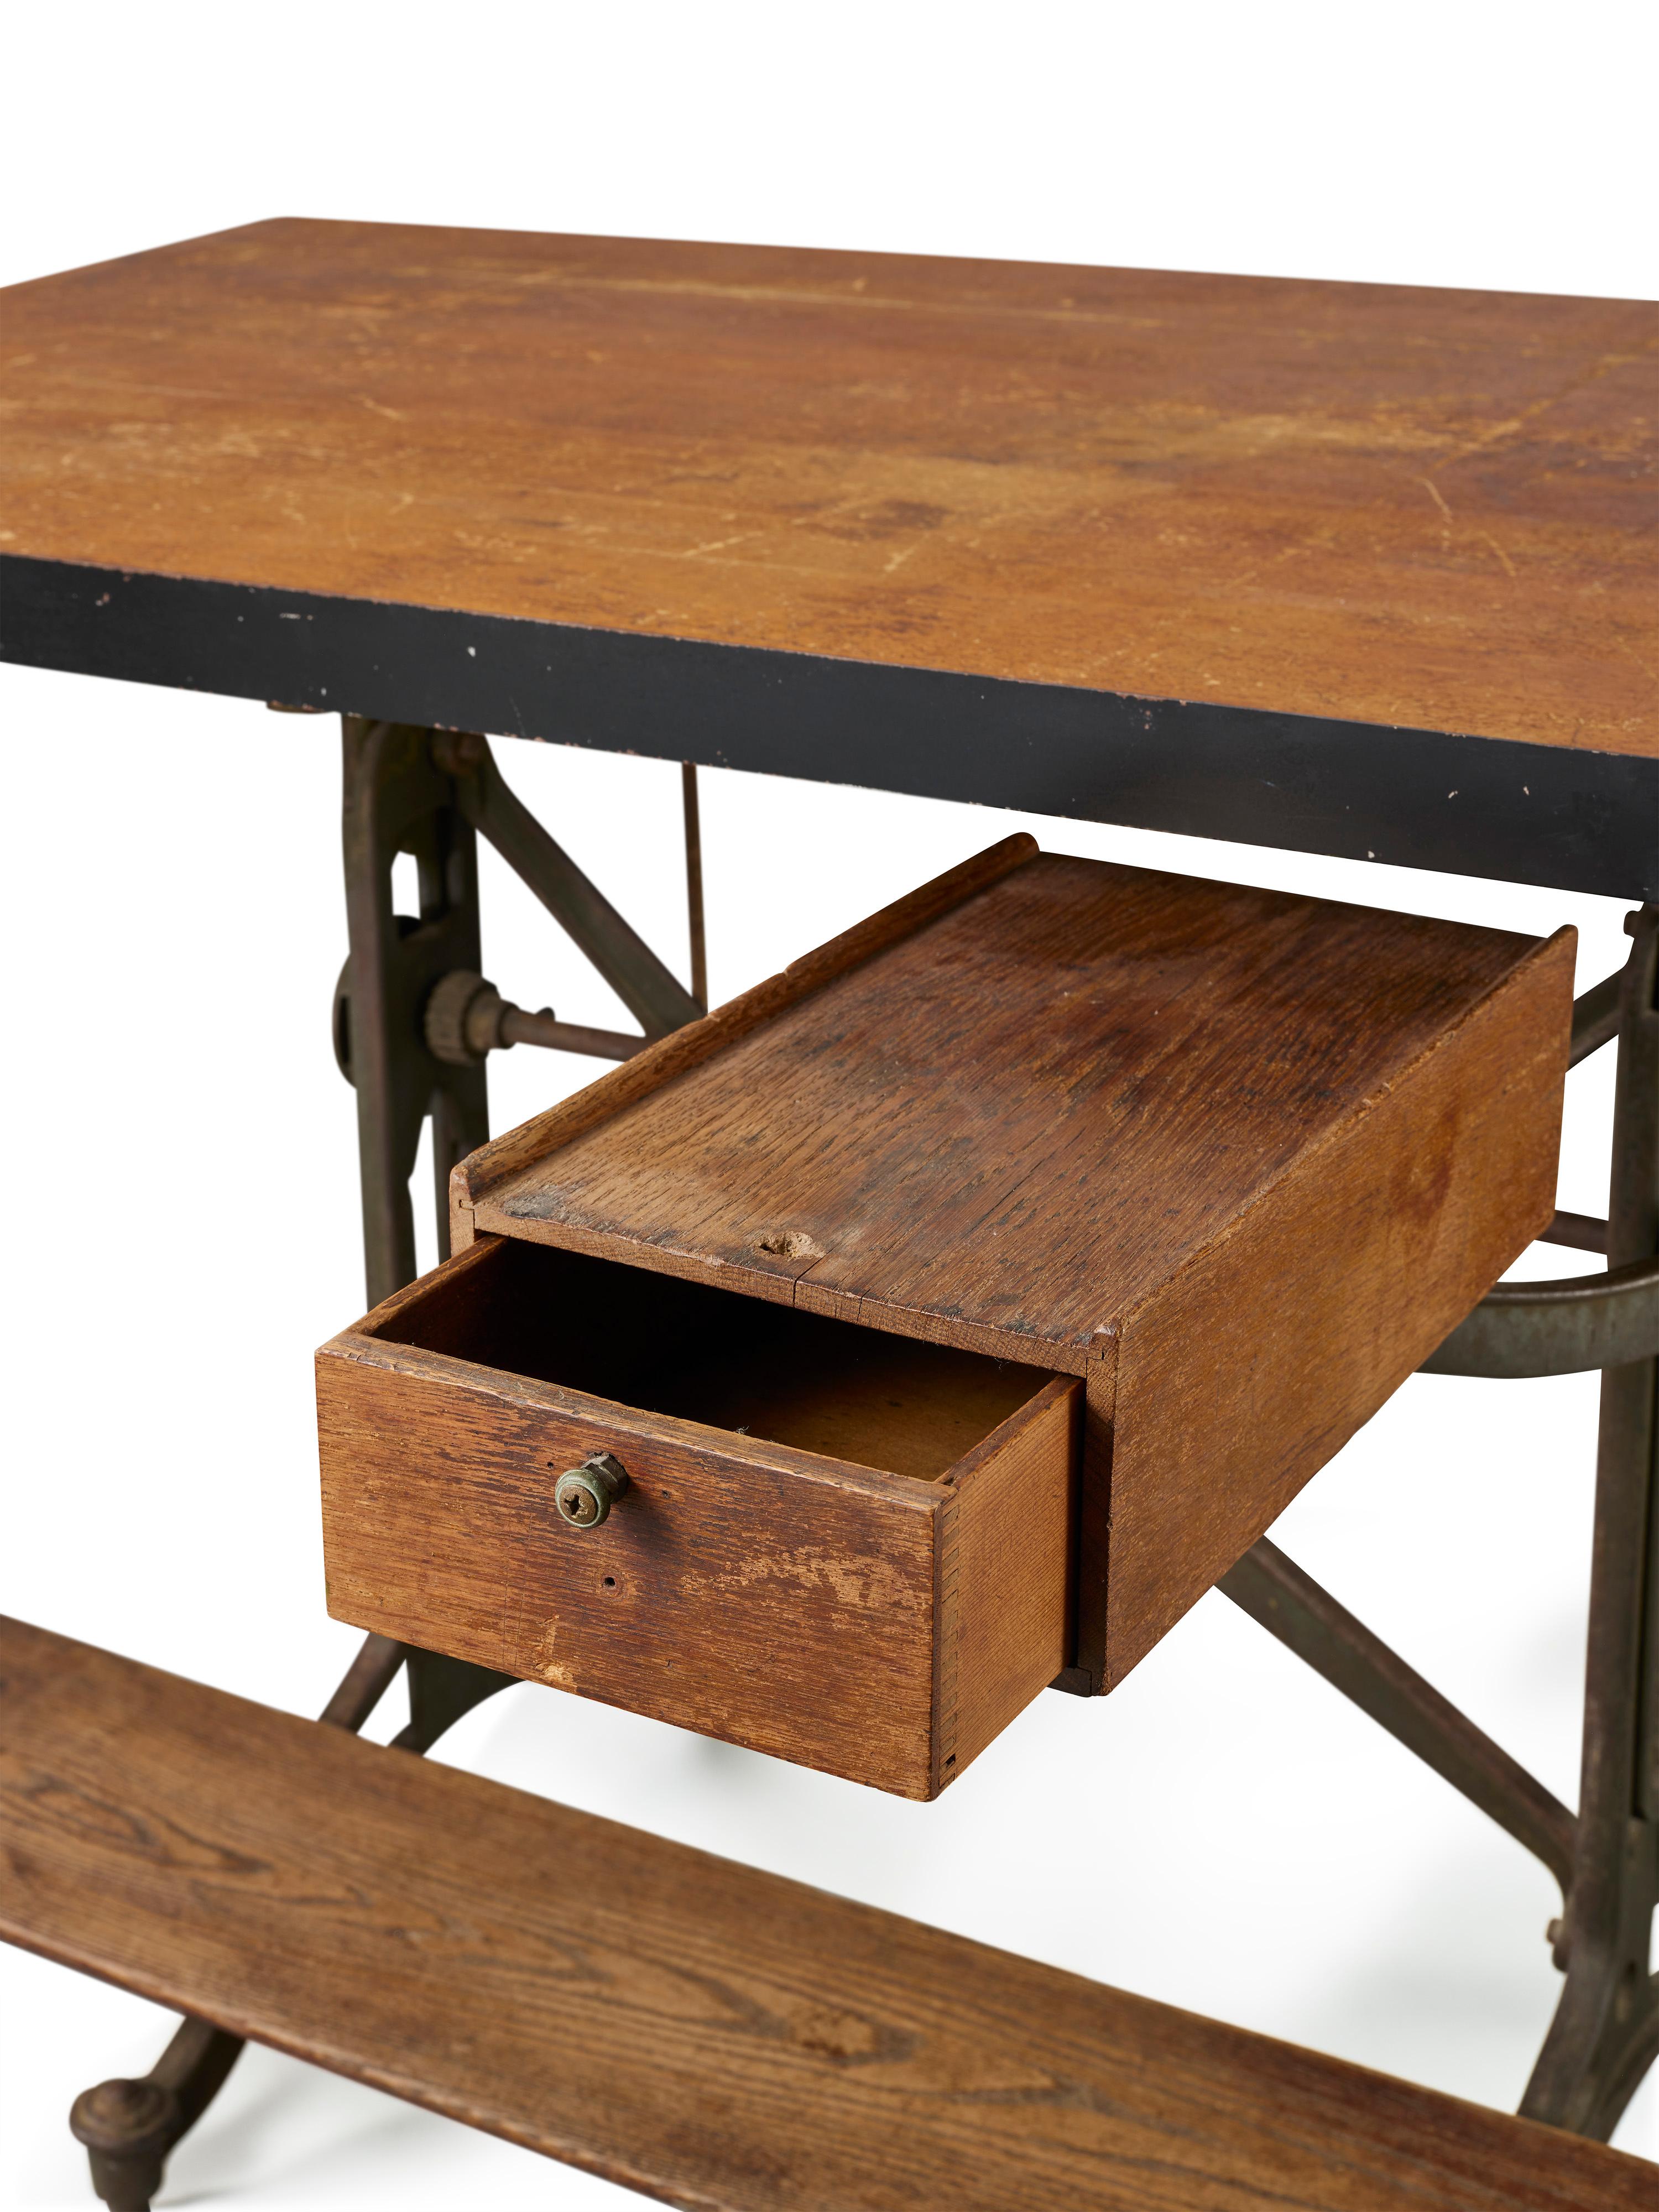 20th Century Original Keuffel and Esser Drafting Table For Sale